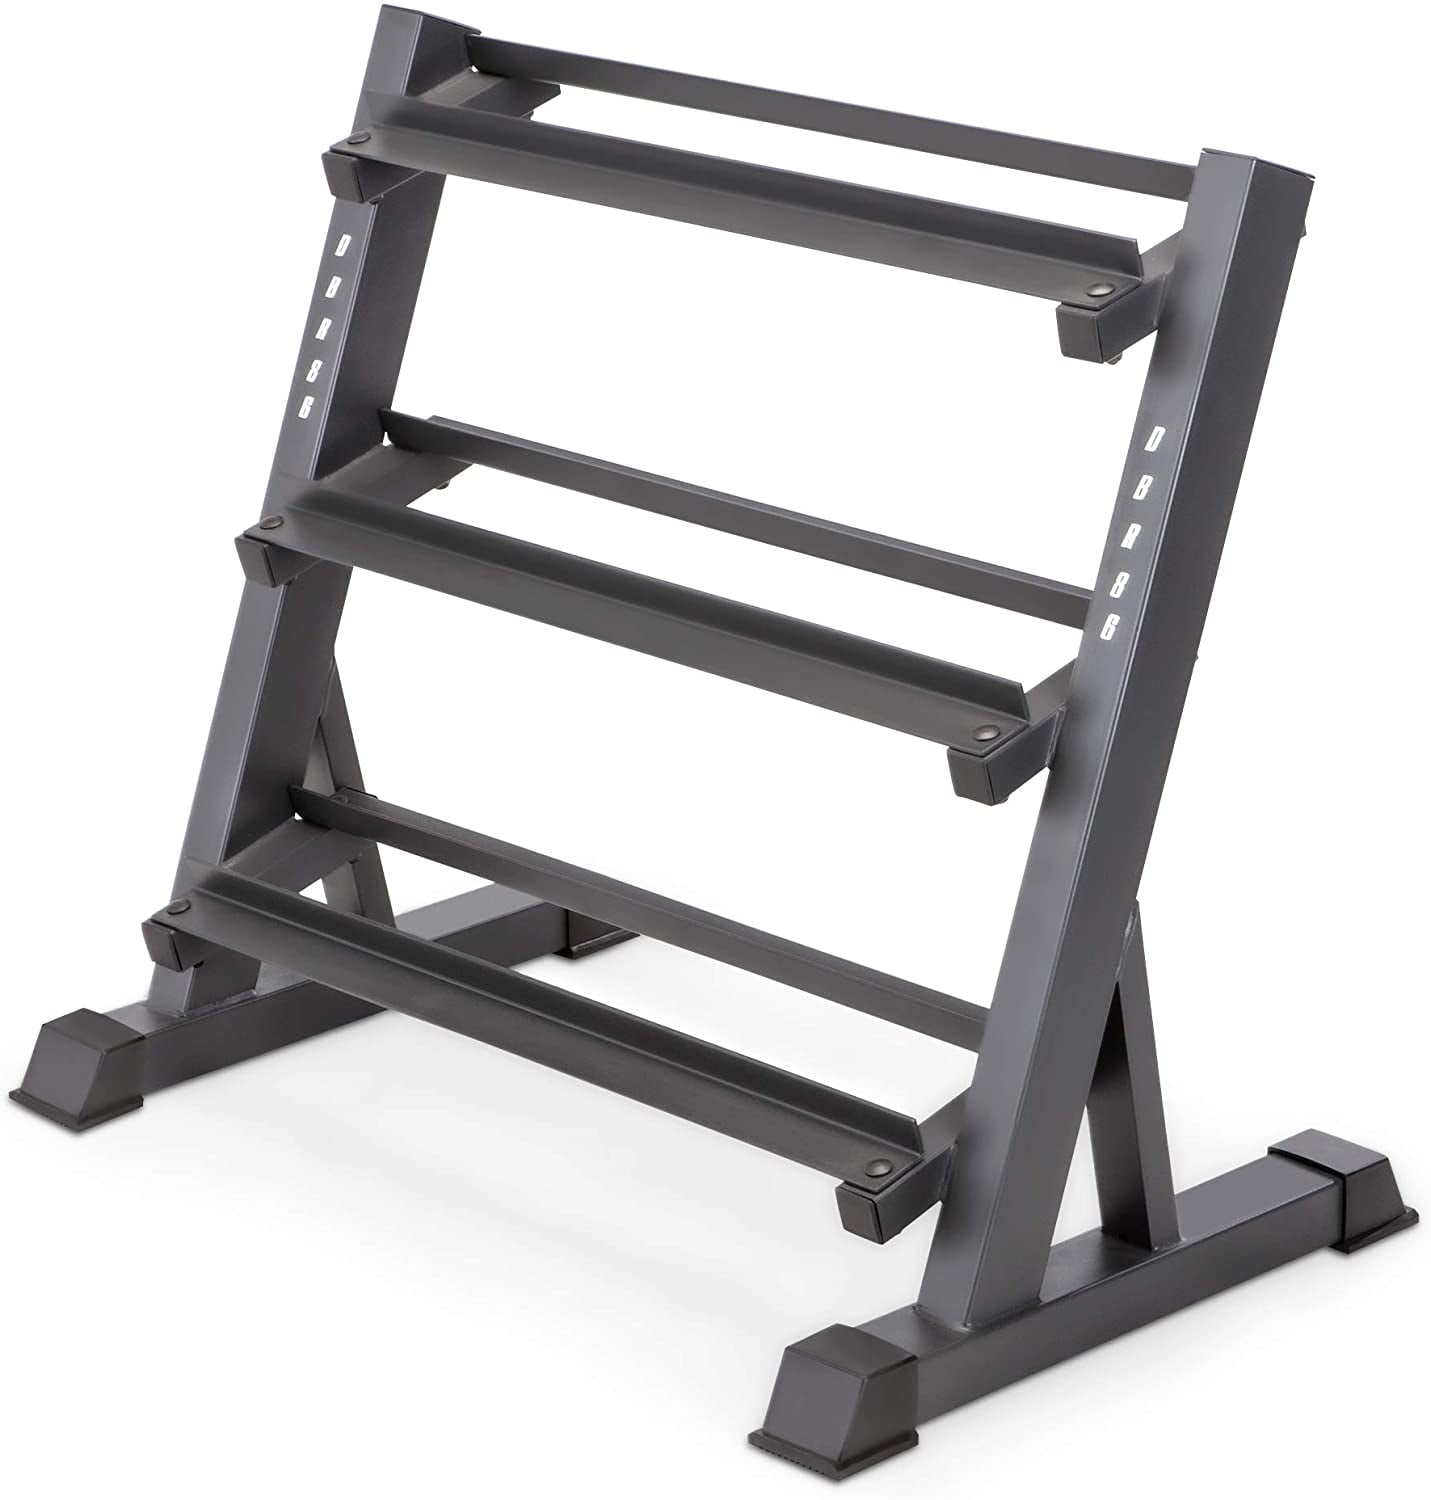 Details about   Dumbbell Rack Compact Free Weight Stand Home Gym Storage Shelf Holder Organizer 